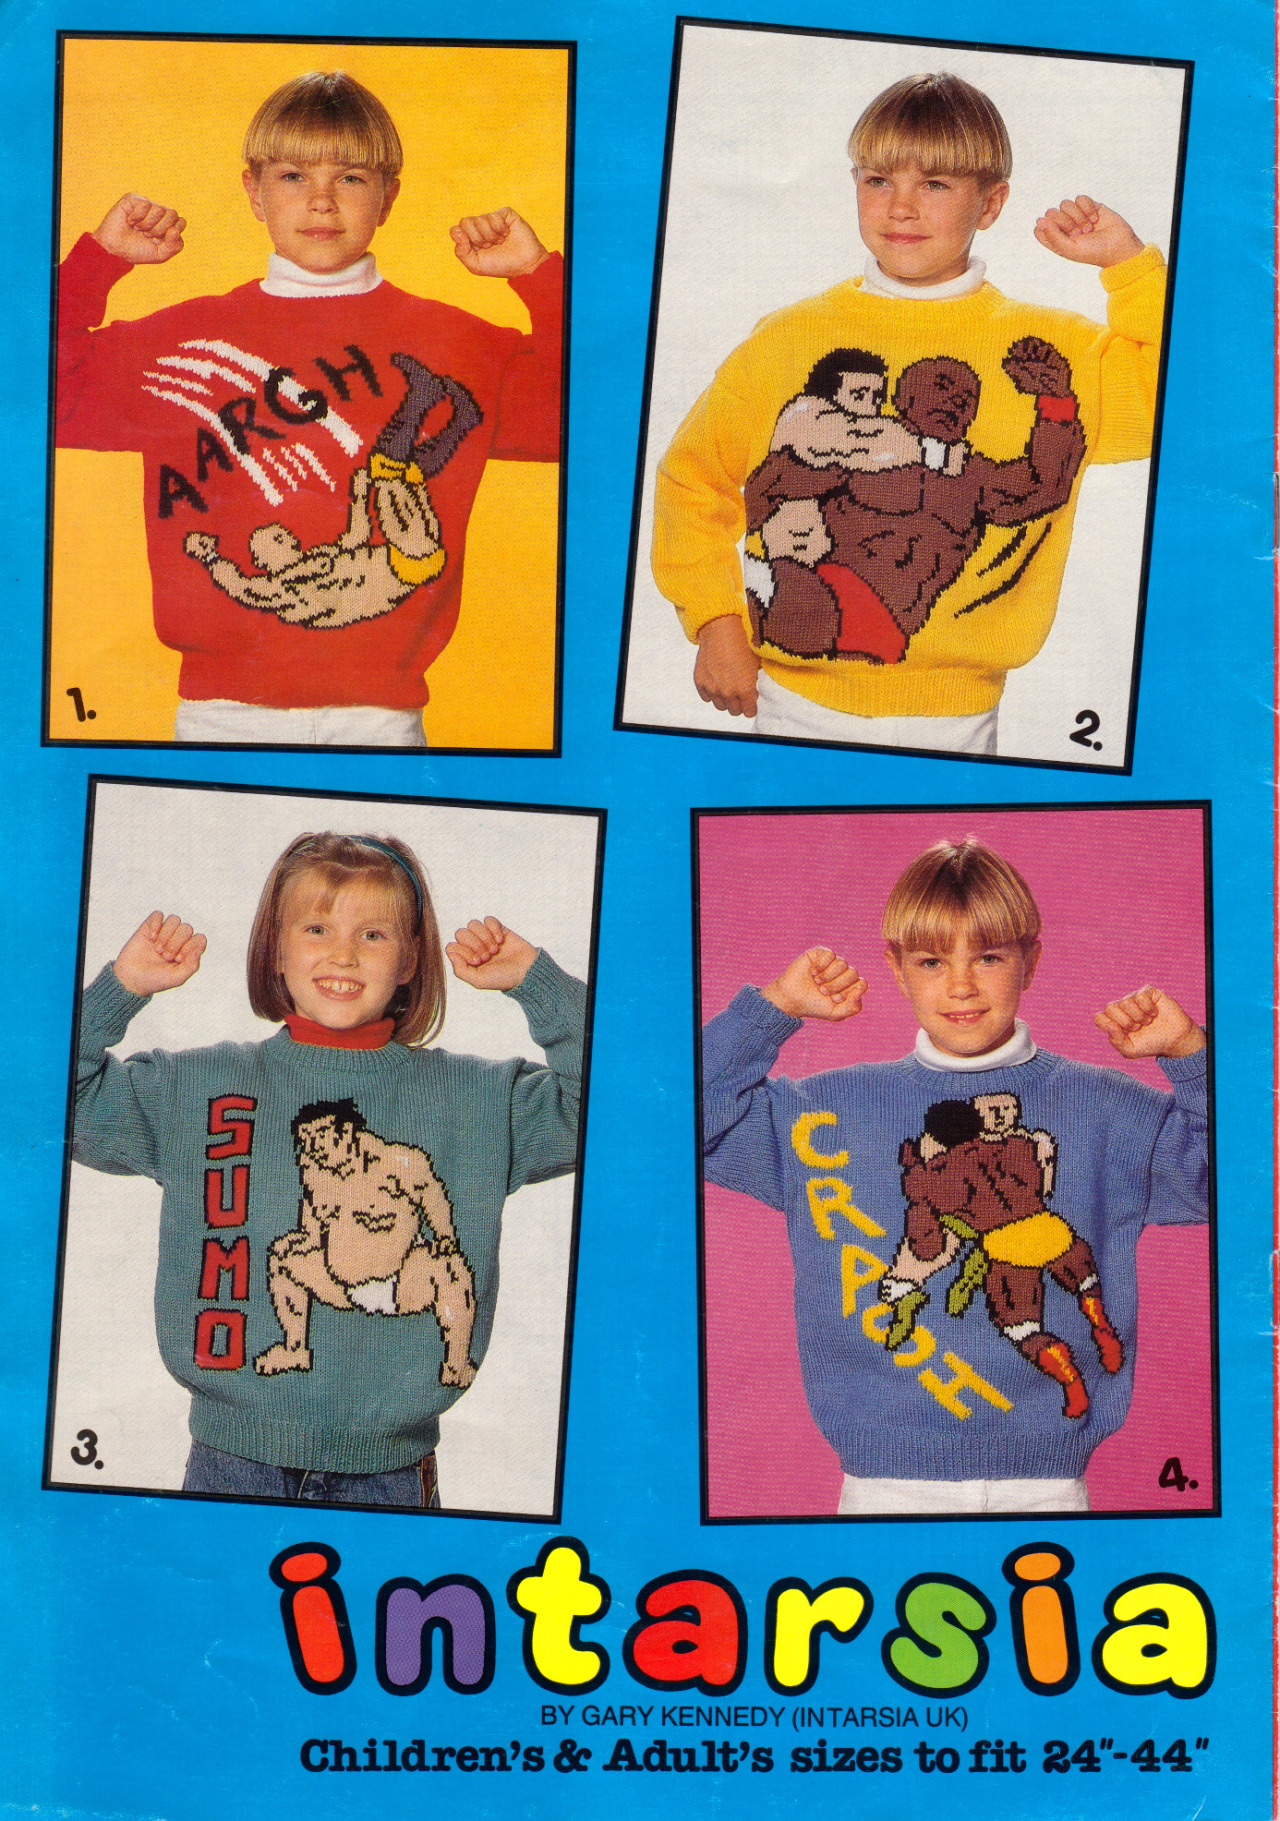 Presenting Wrestling Action: 4 knitting patterns by Gary Kennedy (Intarsia UK, 1992)